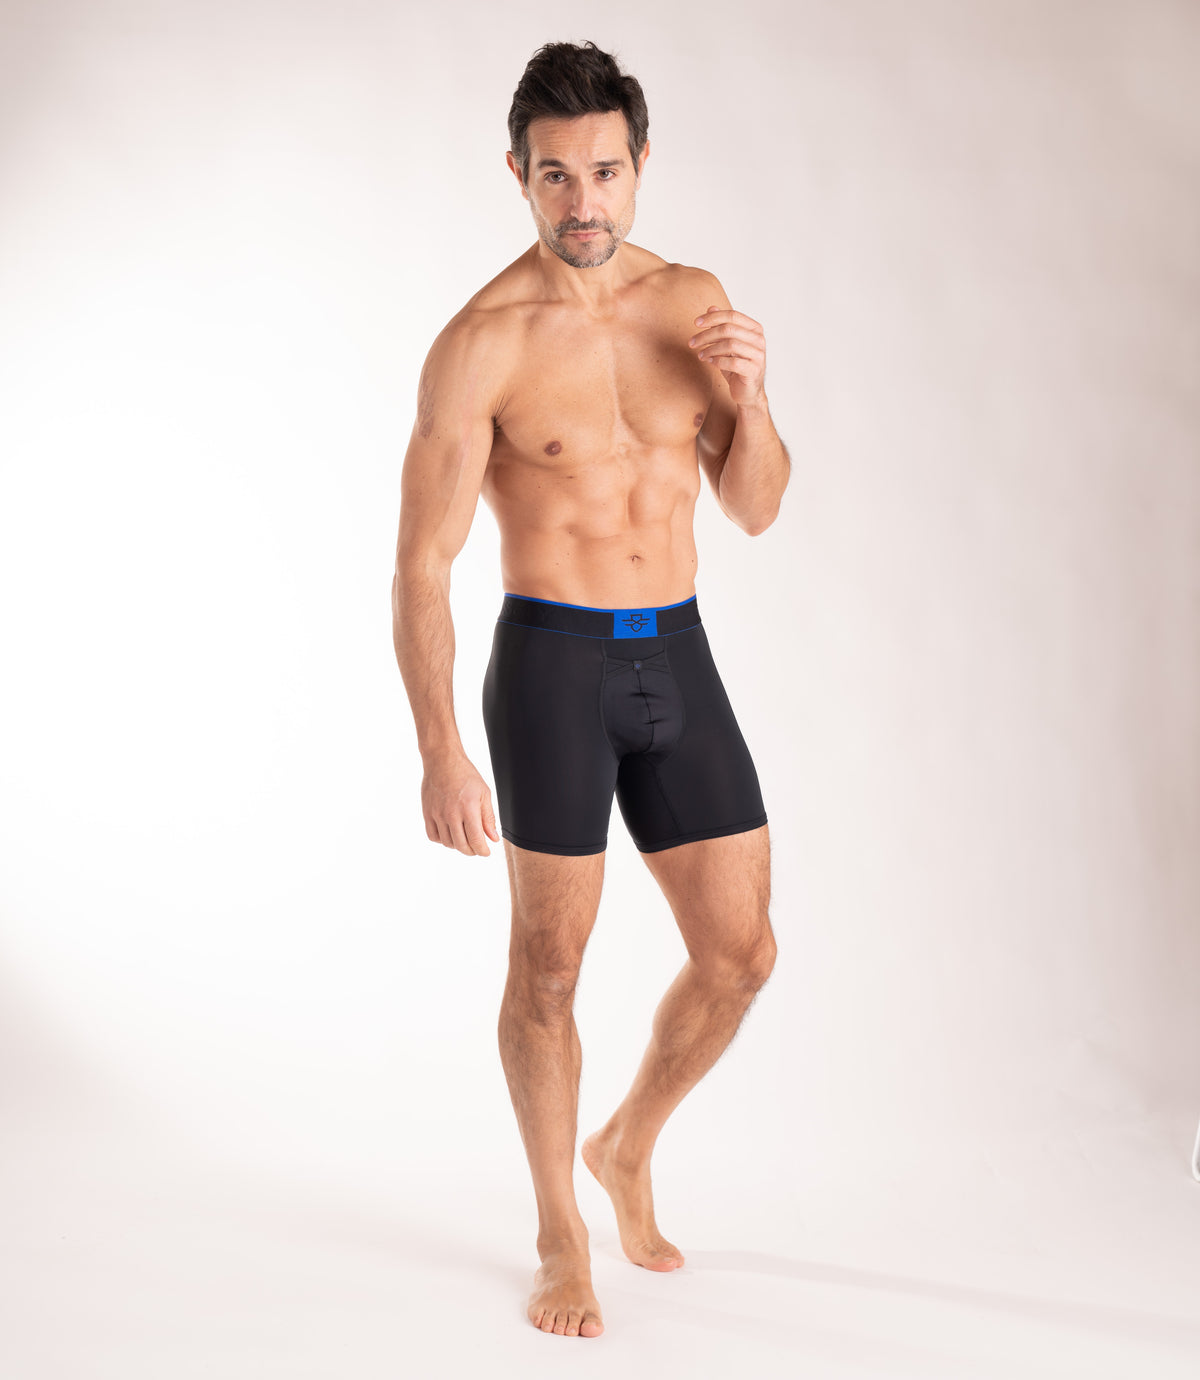 Crossfly men&#39;s Pro 7&quot; black / royal boxers from the Performance series, featuring X-Fly and Coccoon internal pocket support.